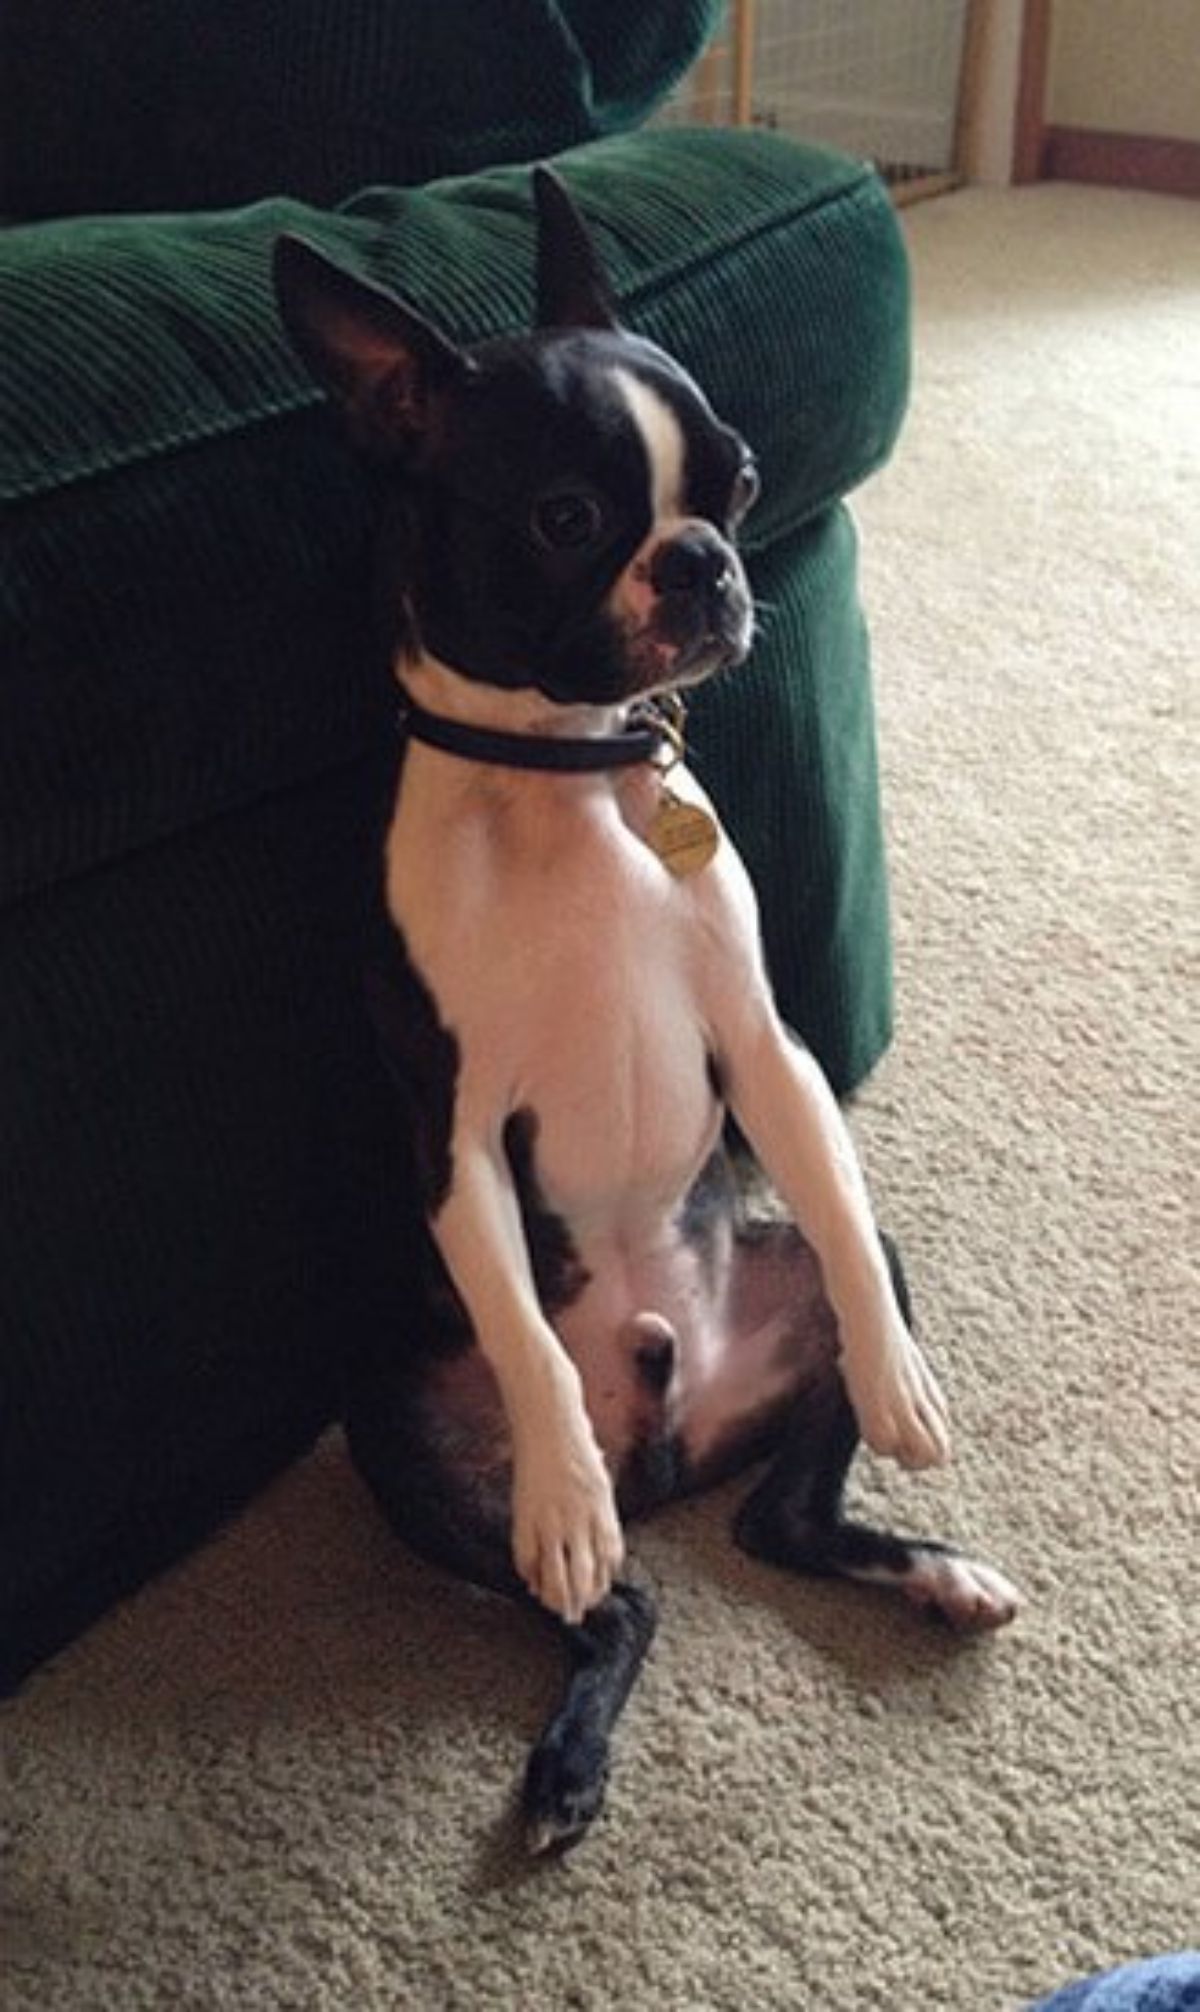 black and white french bulldog sitting up on its haunches leaning its back against a green sofa